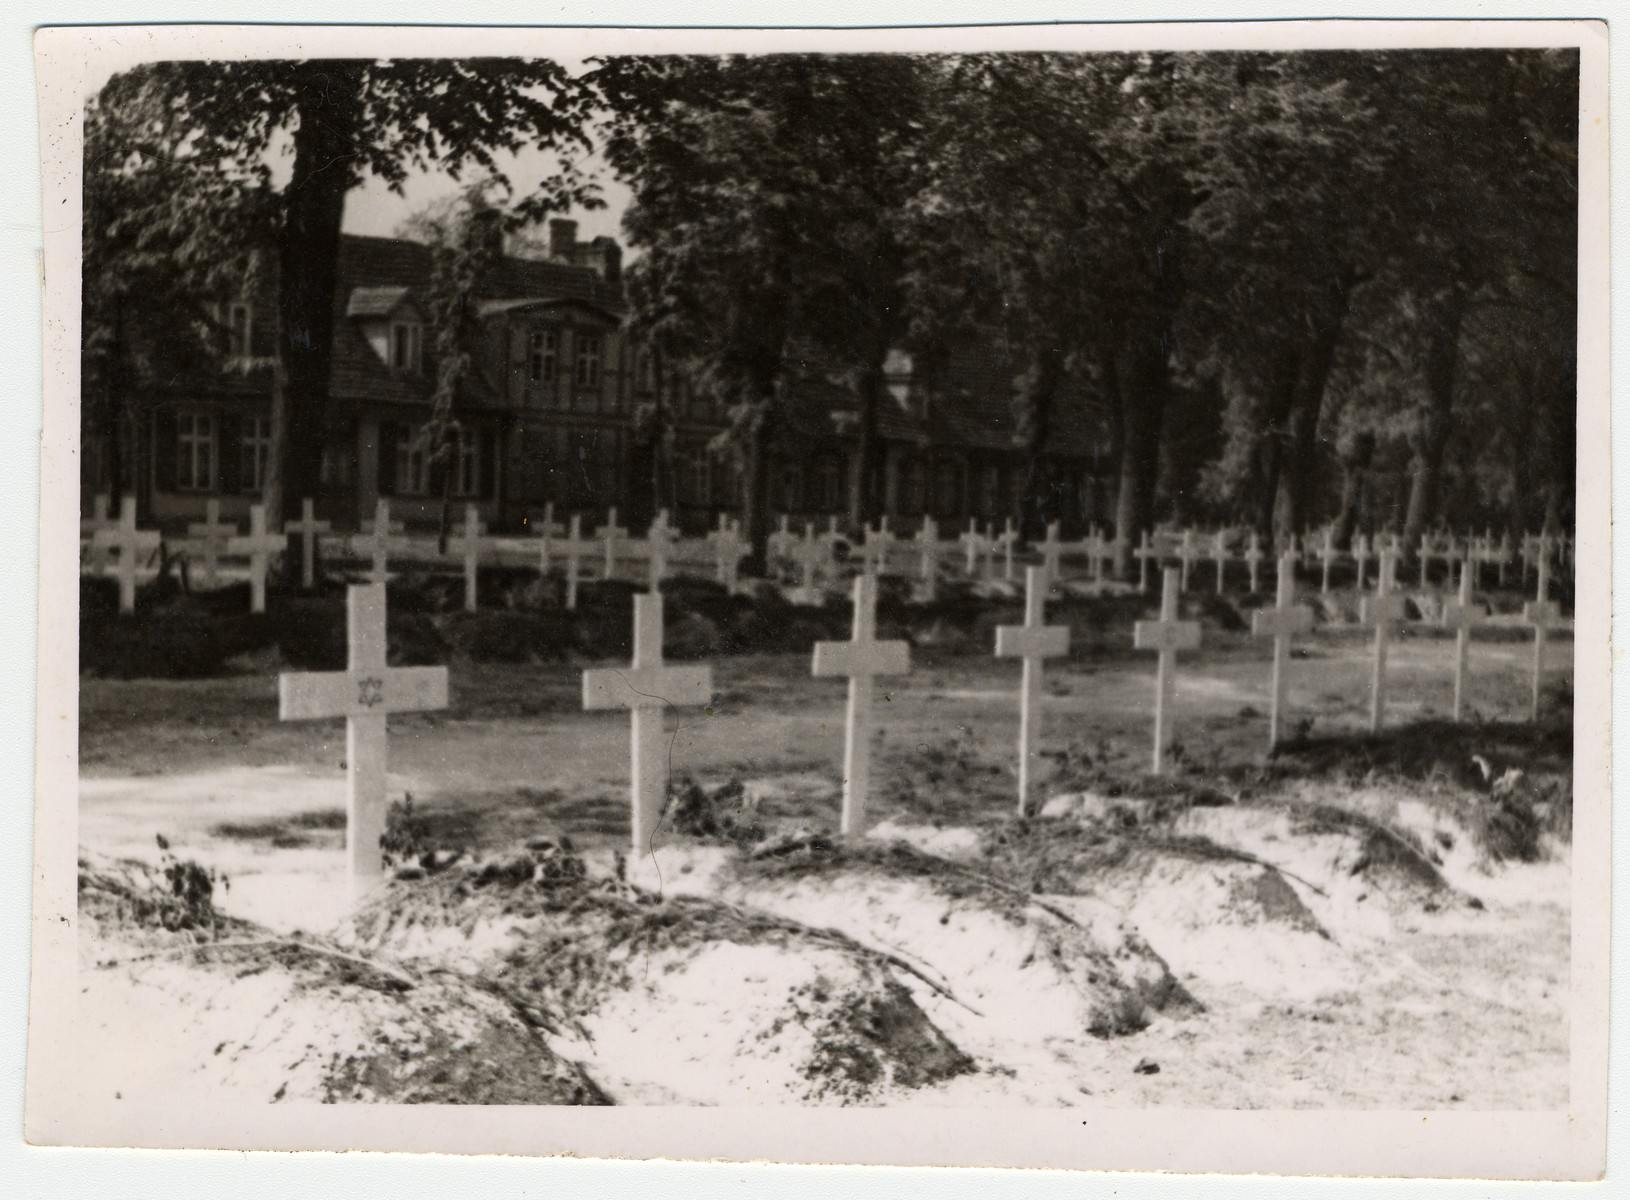 Graves dug by the people of Ludwigslust on the palace grounds of the Archduke of Mecklenburg.  German civilians were forced by U.S. troops to bury the bodies of prisoners killed in the Woebbelin concentration camp.